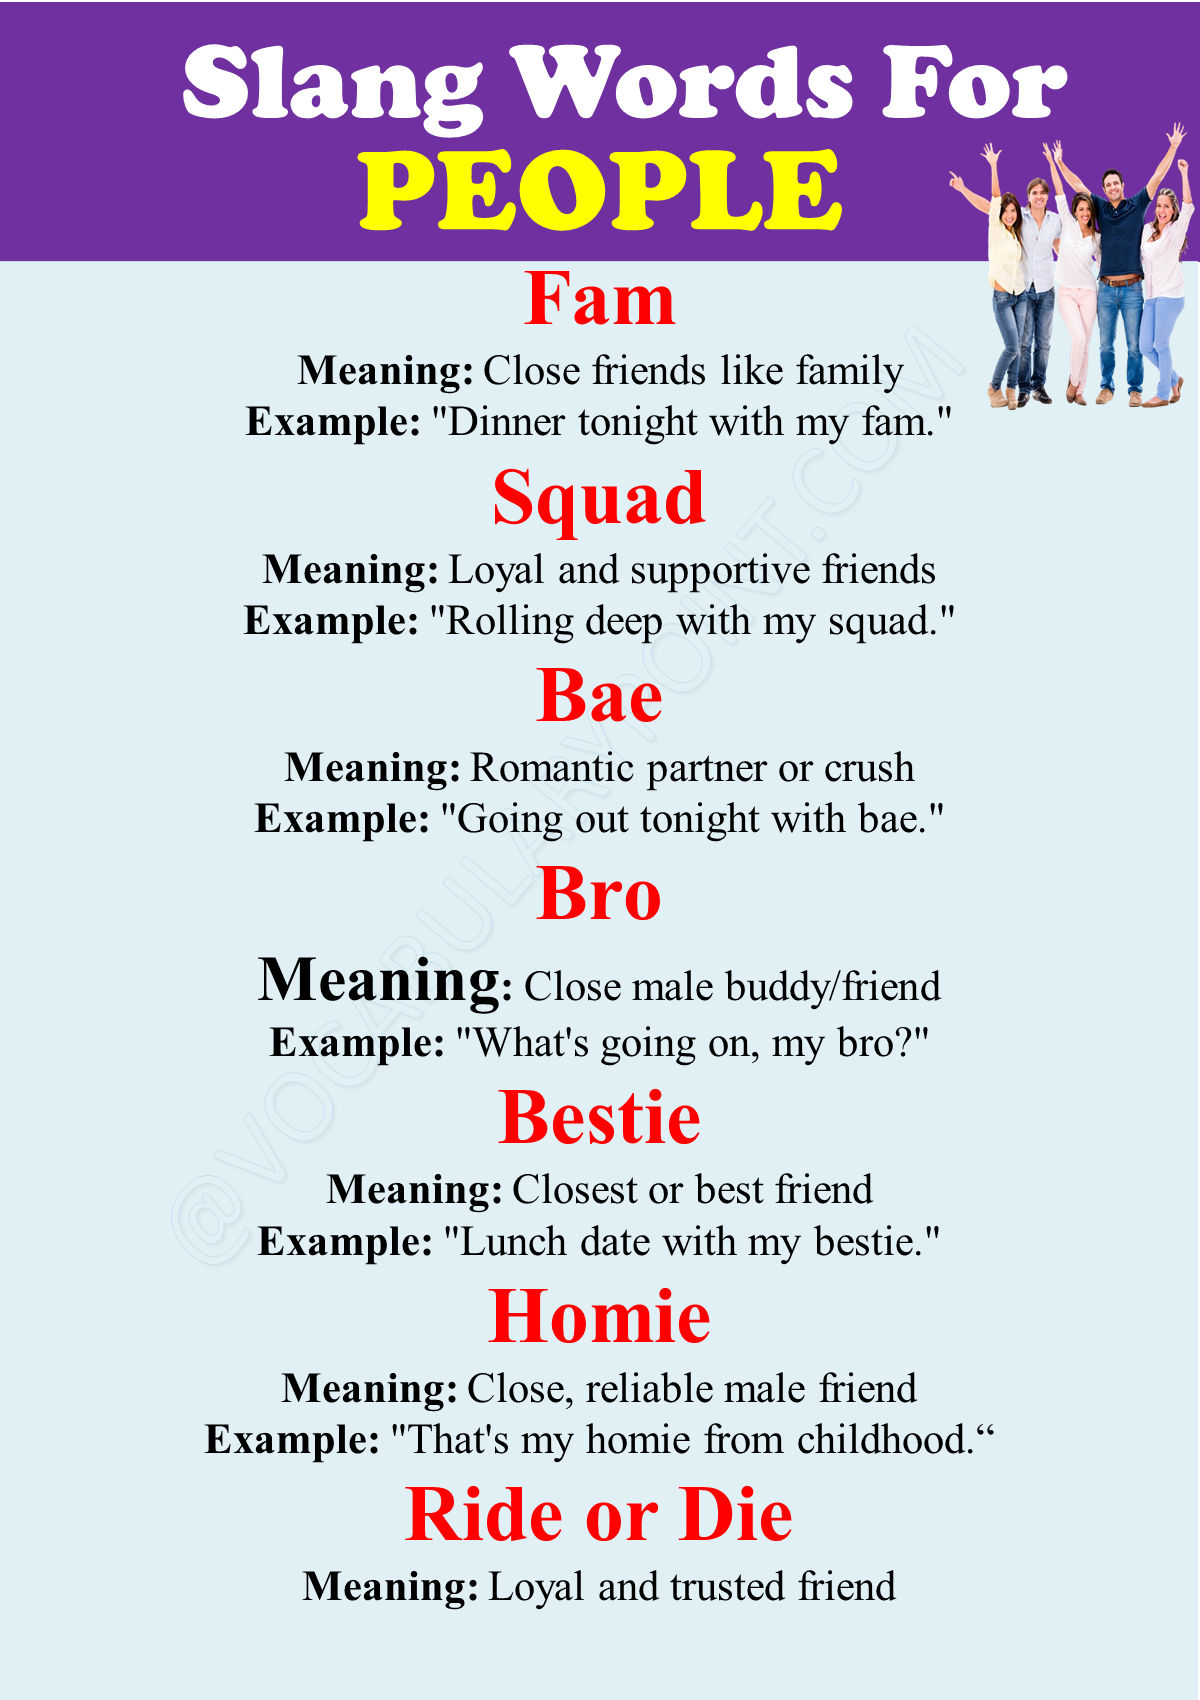 Slang Words For People